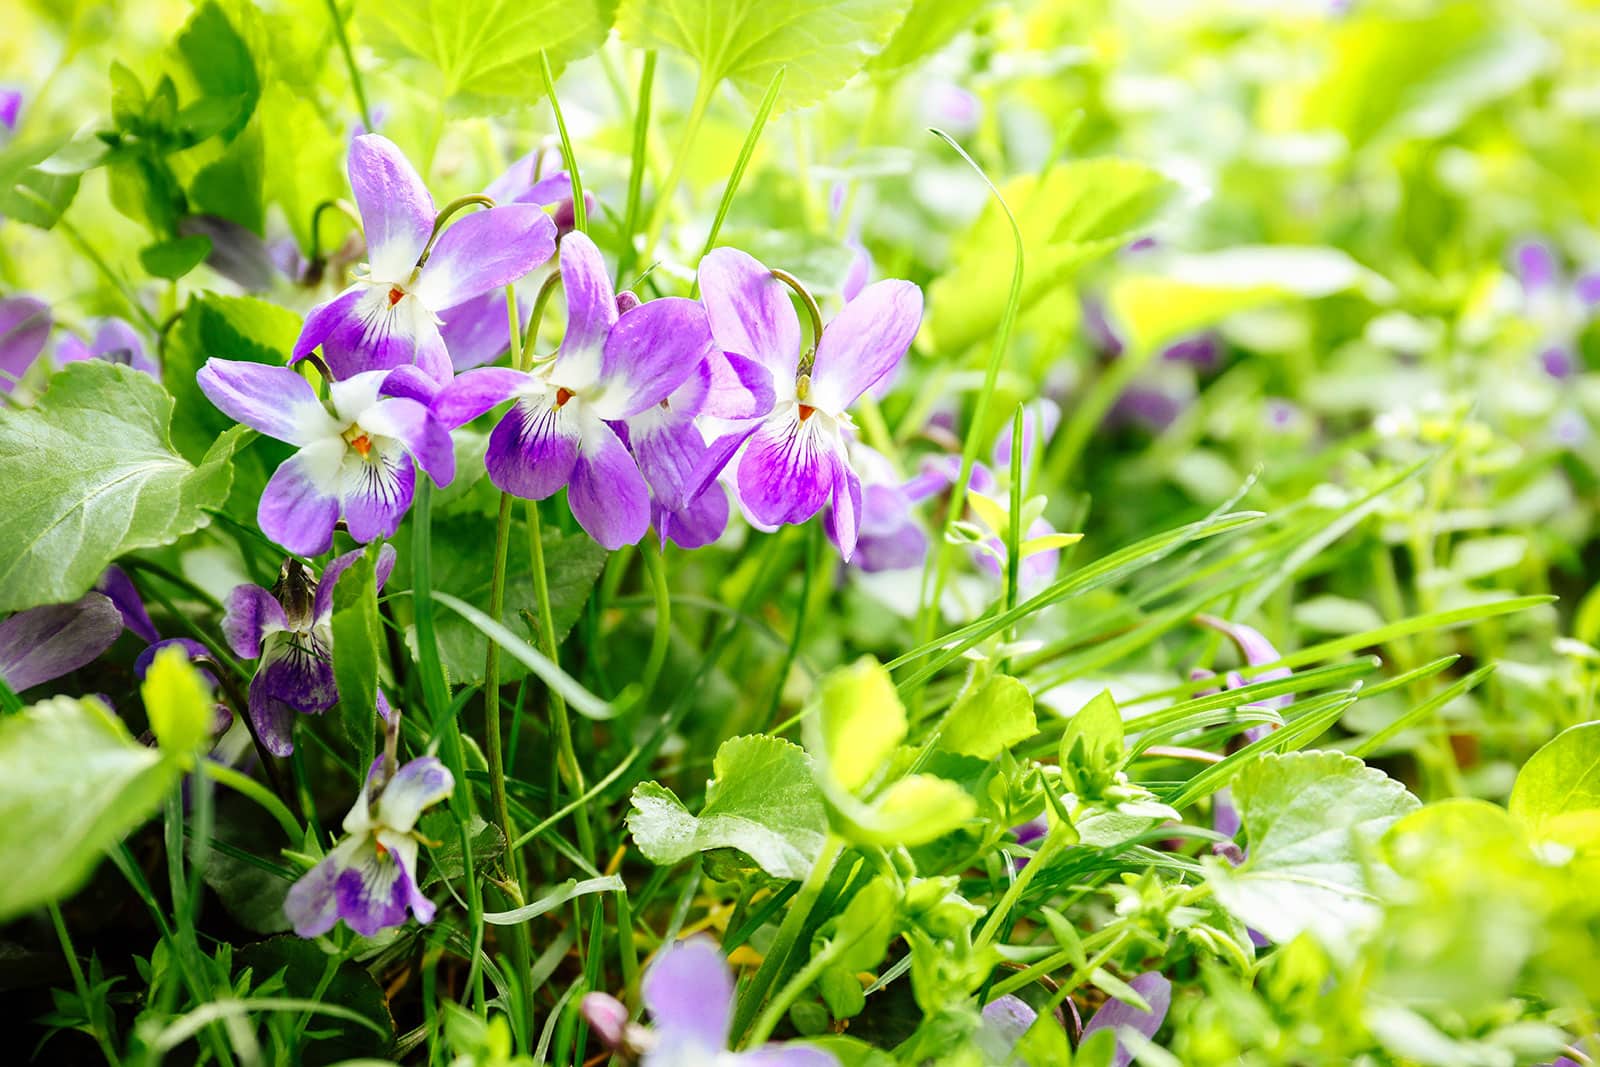 Close-up of violets growing in a wild lawn